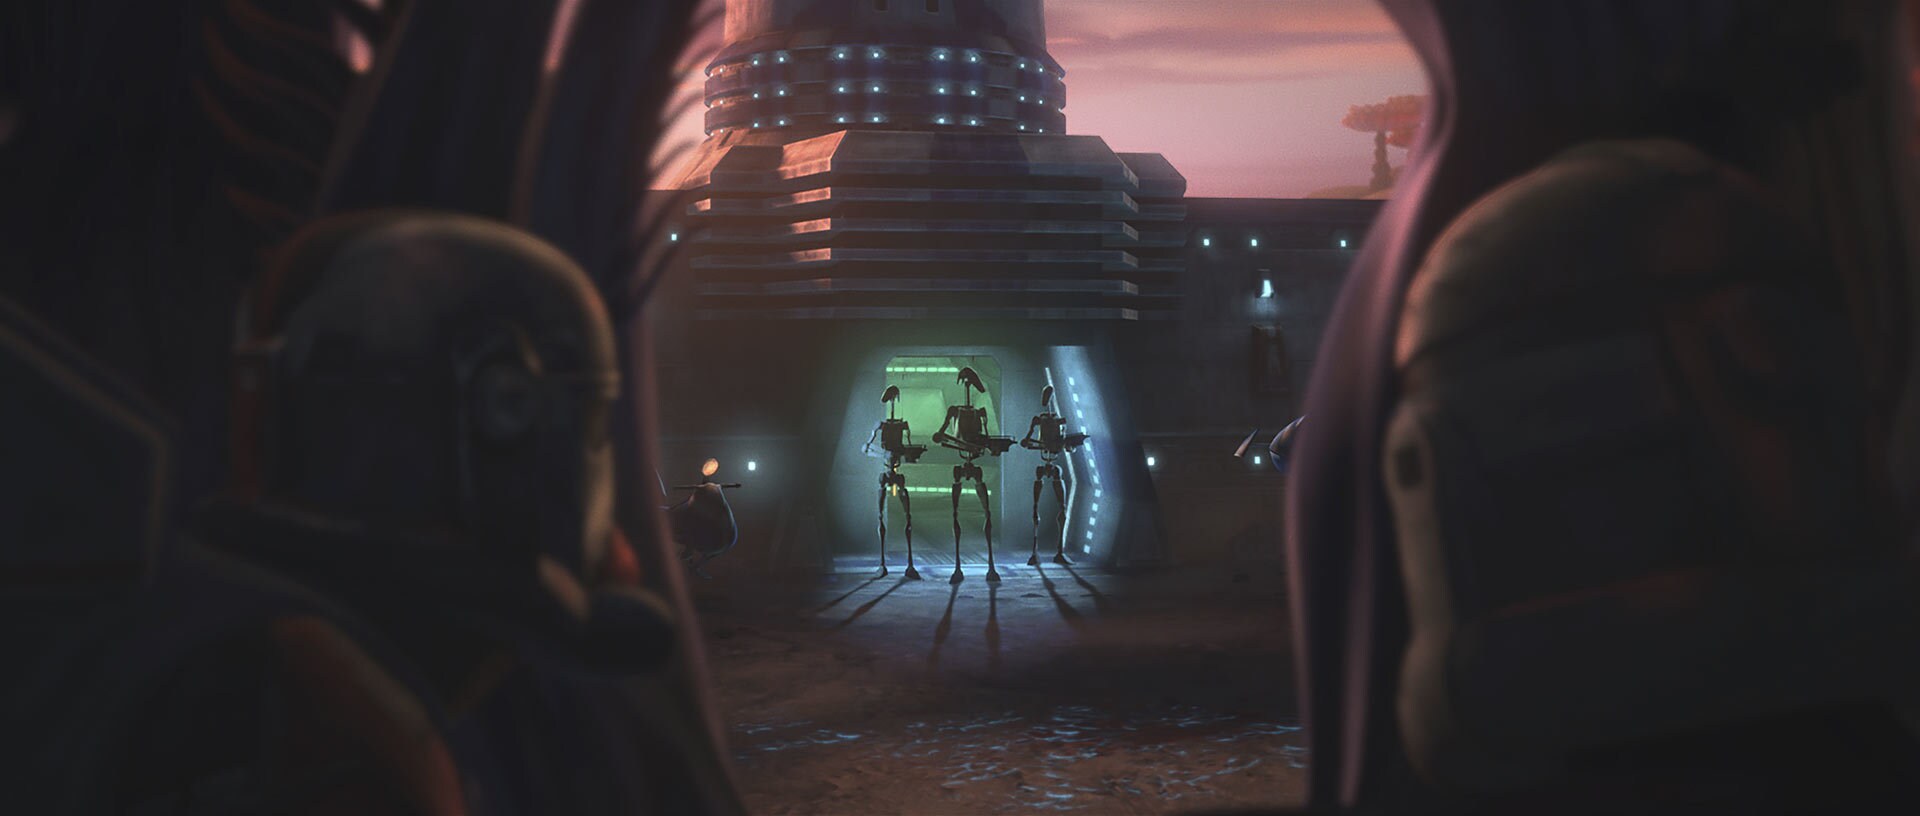 When they arrive at an outpost, the clones storm the entrance, blasting their way into the tower....